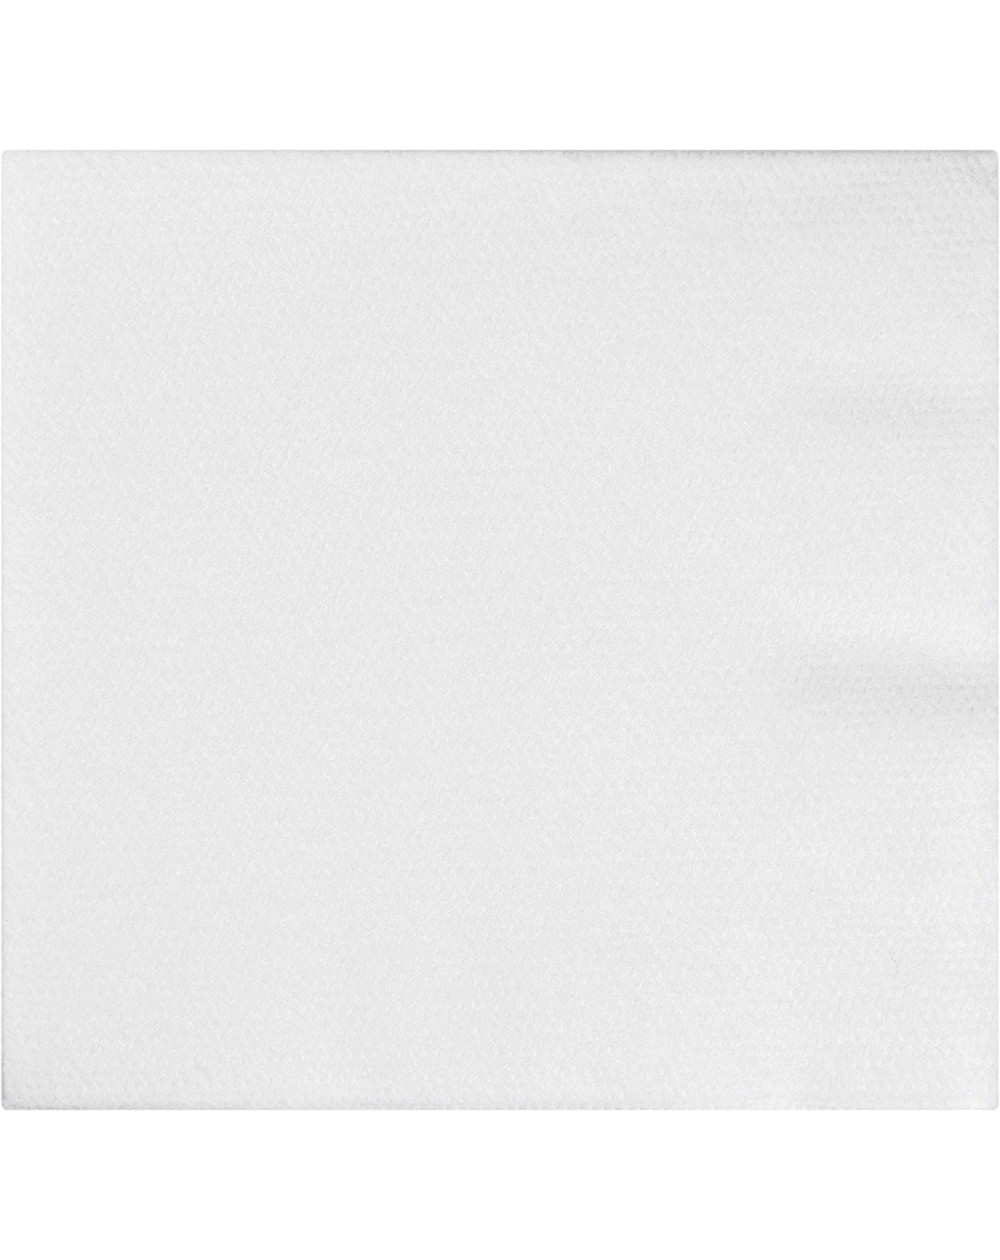 Tableware 613272 24 Count Form & Function Better Than Linen Beverage Napkins- Any- White - C811BHAYYKP $11.66